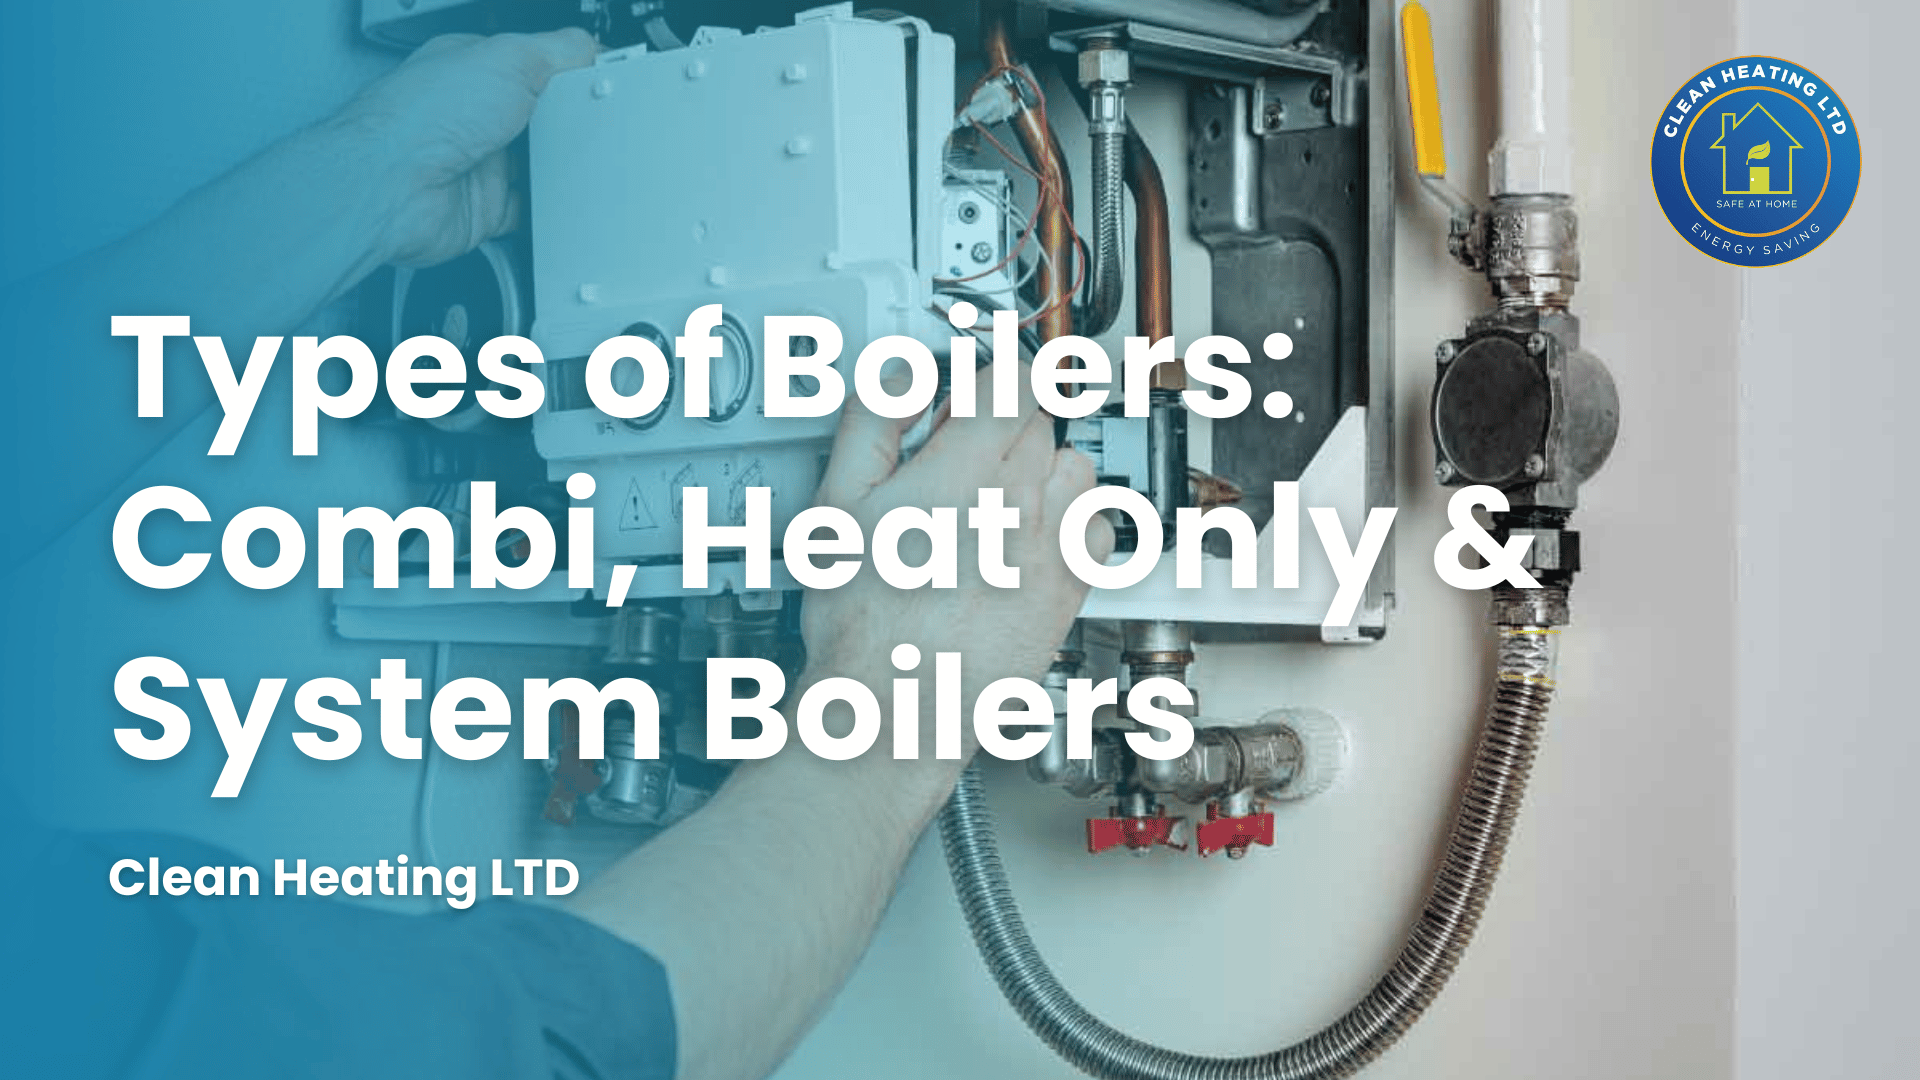 Types of Boilers Combi, Heat Only & System Boilers - Clean Heating LTD